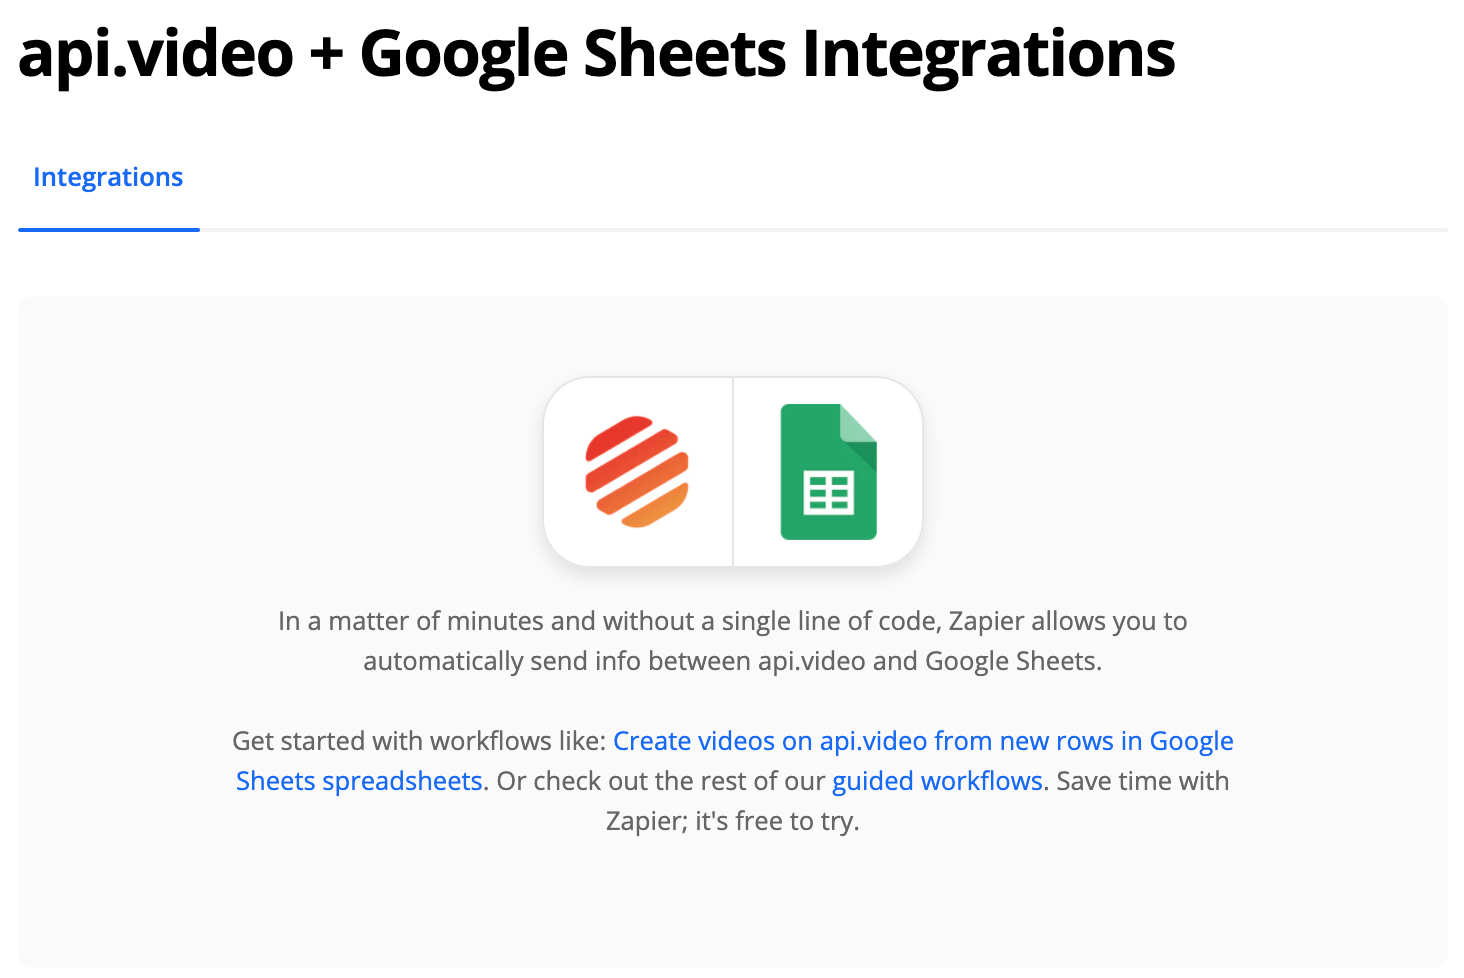 Update a Google Spreadsheet Every Time You Add a Video to api.video (Zapier)